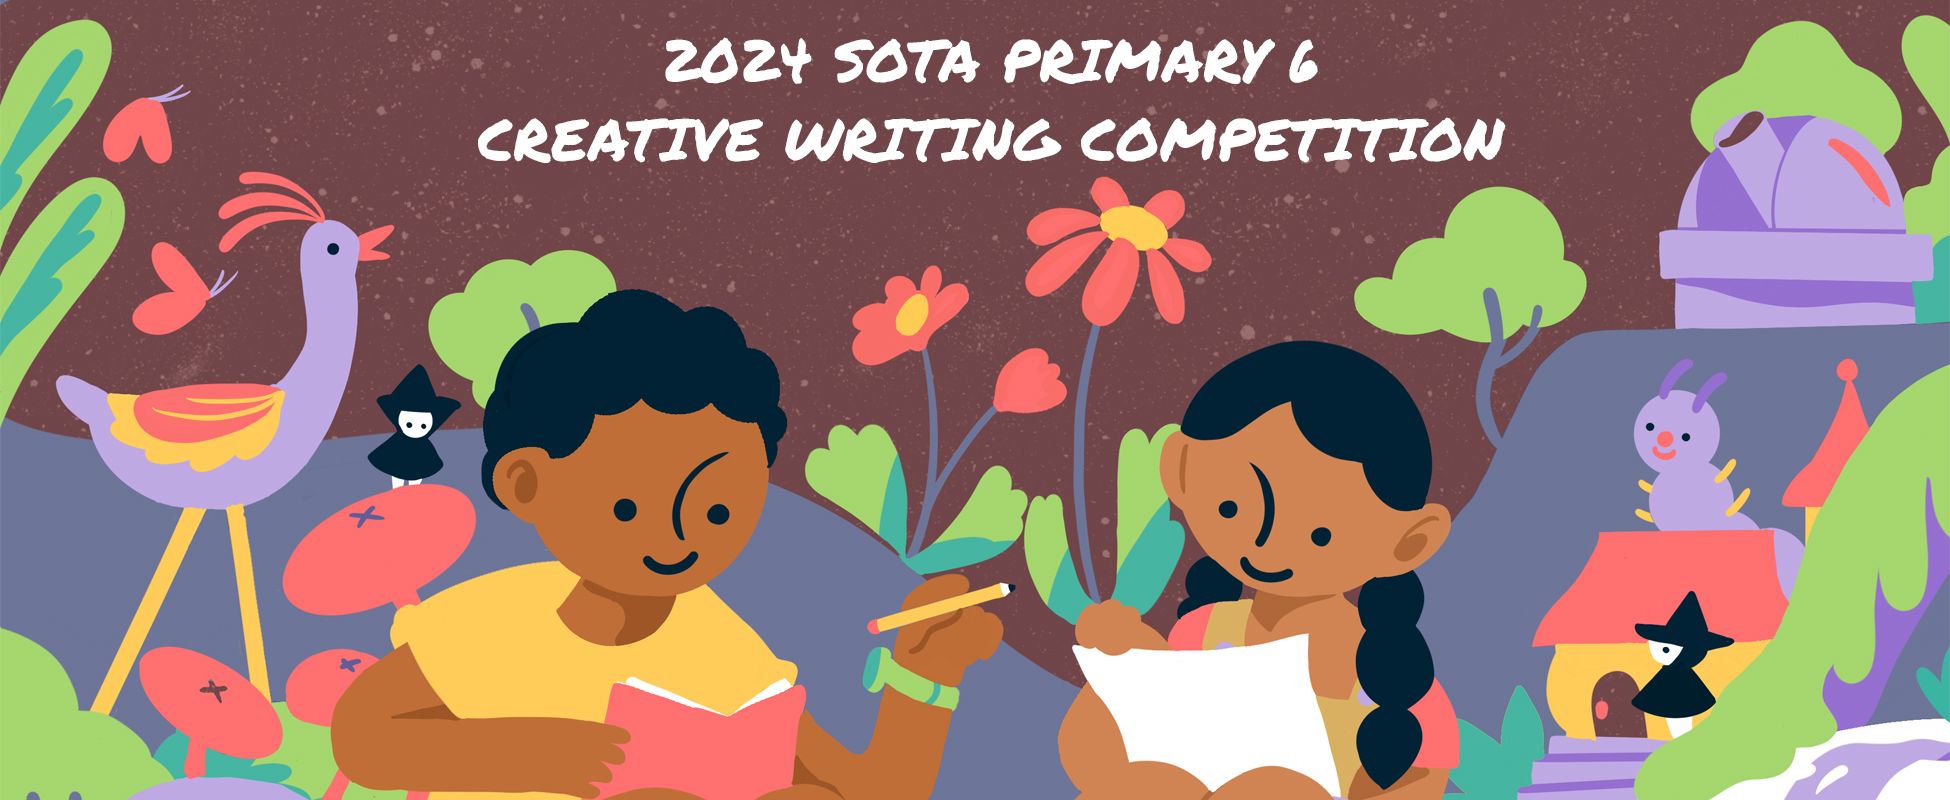 creative writing competition winners